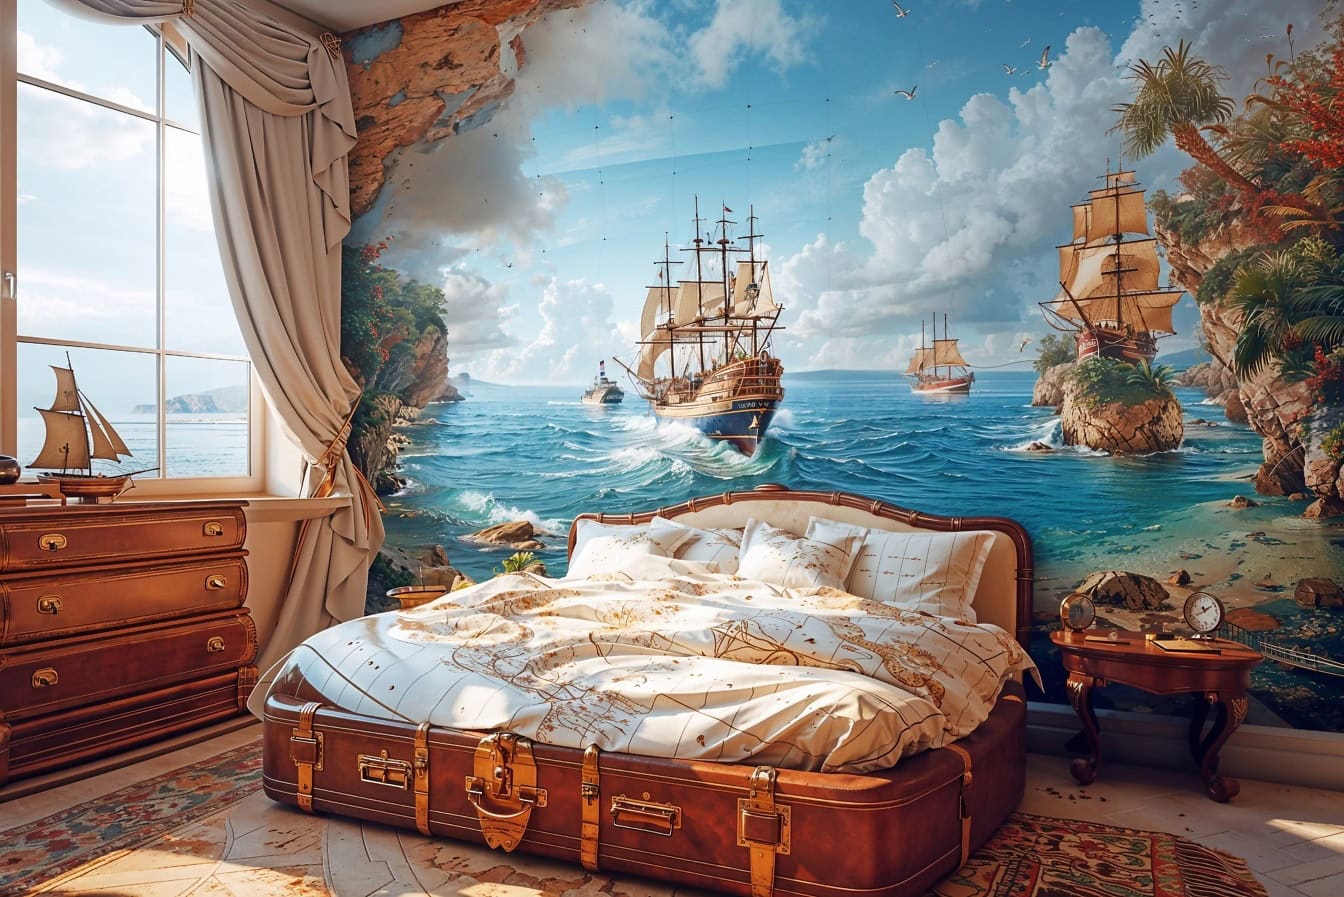 Captain’s bedroom with a large bed in a shape of old suitcase and with a large maritime mural of ships on wall